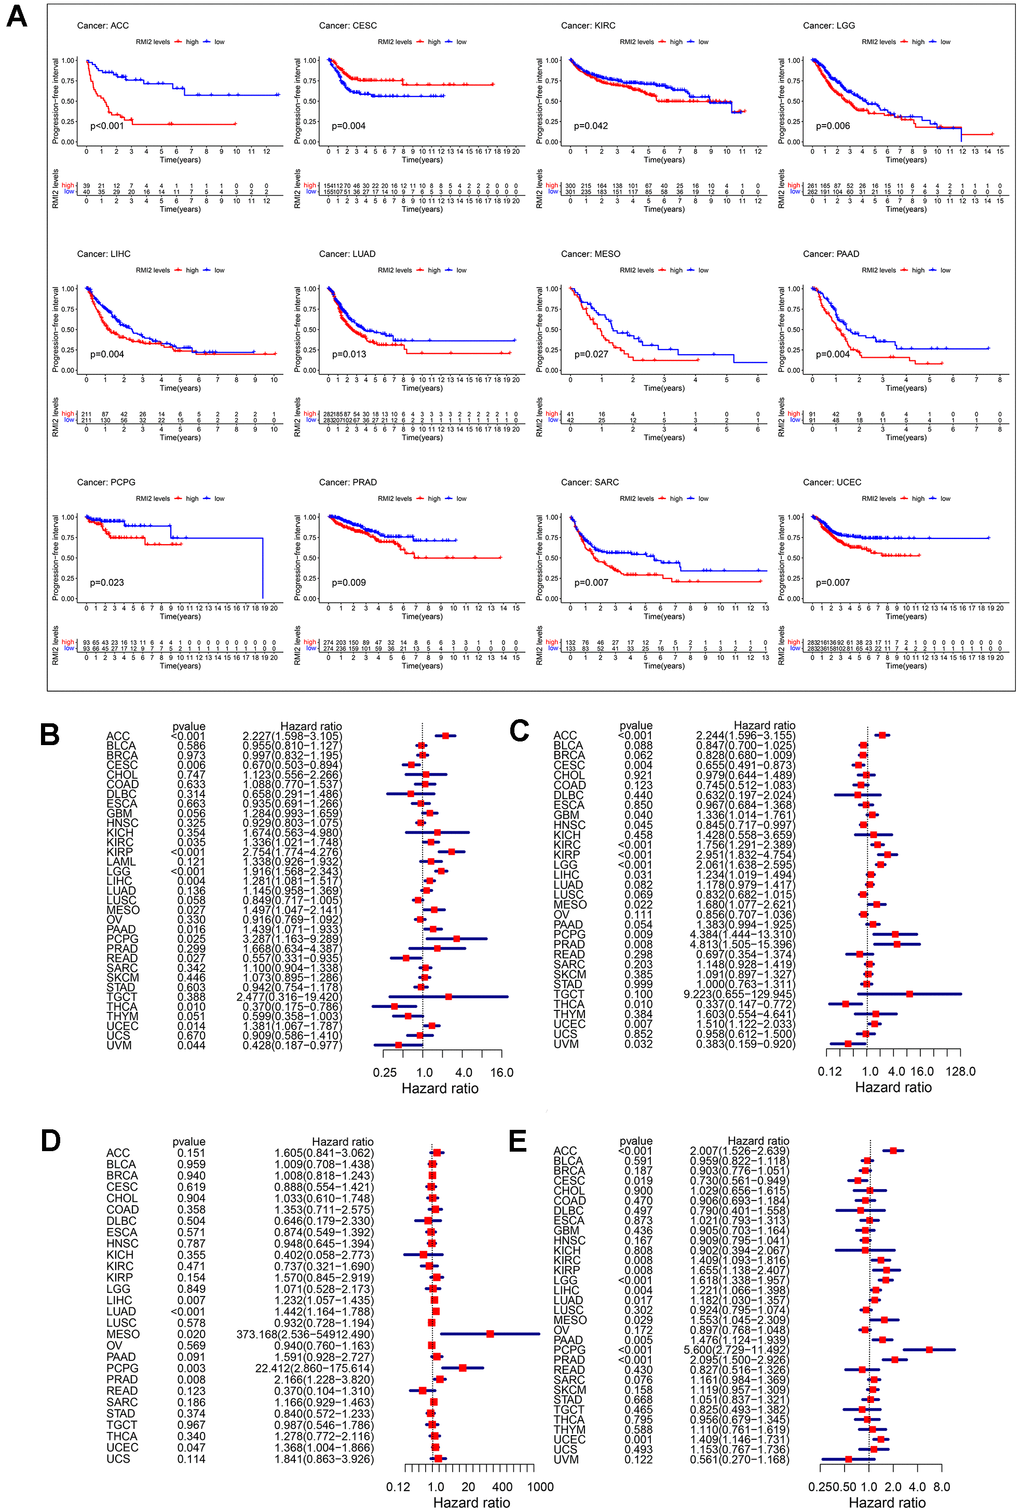 Correlation between RMI2 expression in patients with DFI (A). (A) Survival analyses of RMI2 expression via the Kaplan–Meier PFI curves in ACC, CESC, KIRC, LGG, LIHC, LUAD, MESO, PAAD, PCPG, PRAD, SARC and UCEC. Cox proportional risk model was used to study the effect of RMI2 on the prognosis of multiple human tumors (B–E). (B) Effect of RMI2 on OS in 33 human tumors. (C) Effect of RMI2 on DSS in 33 human tumors. (D) Effect of RMI2 on DFS in 33 human tumors. (E) Effect of RMI2 on PFI in 33 human tumors.